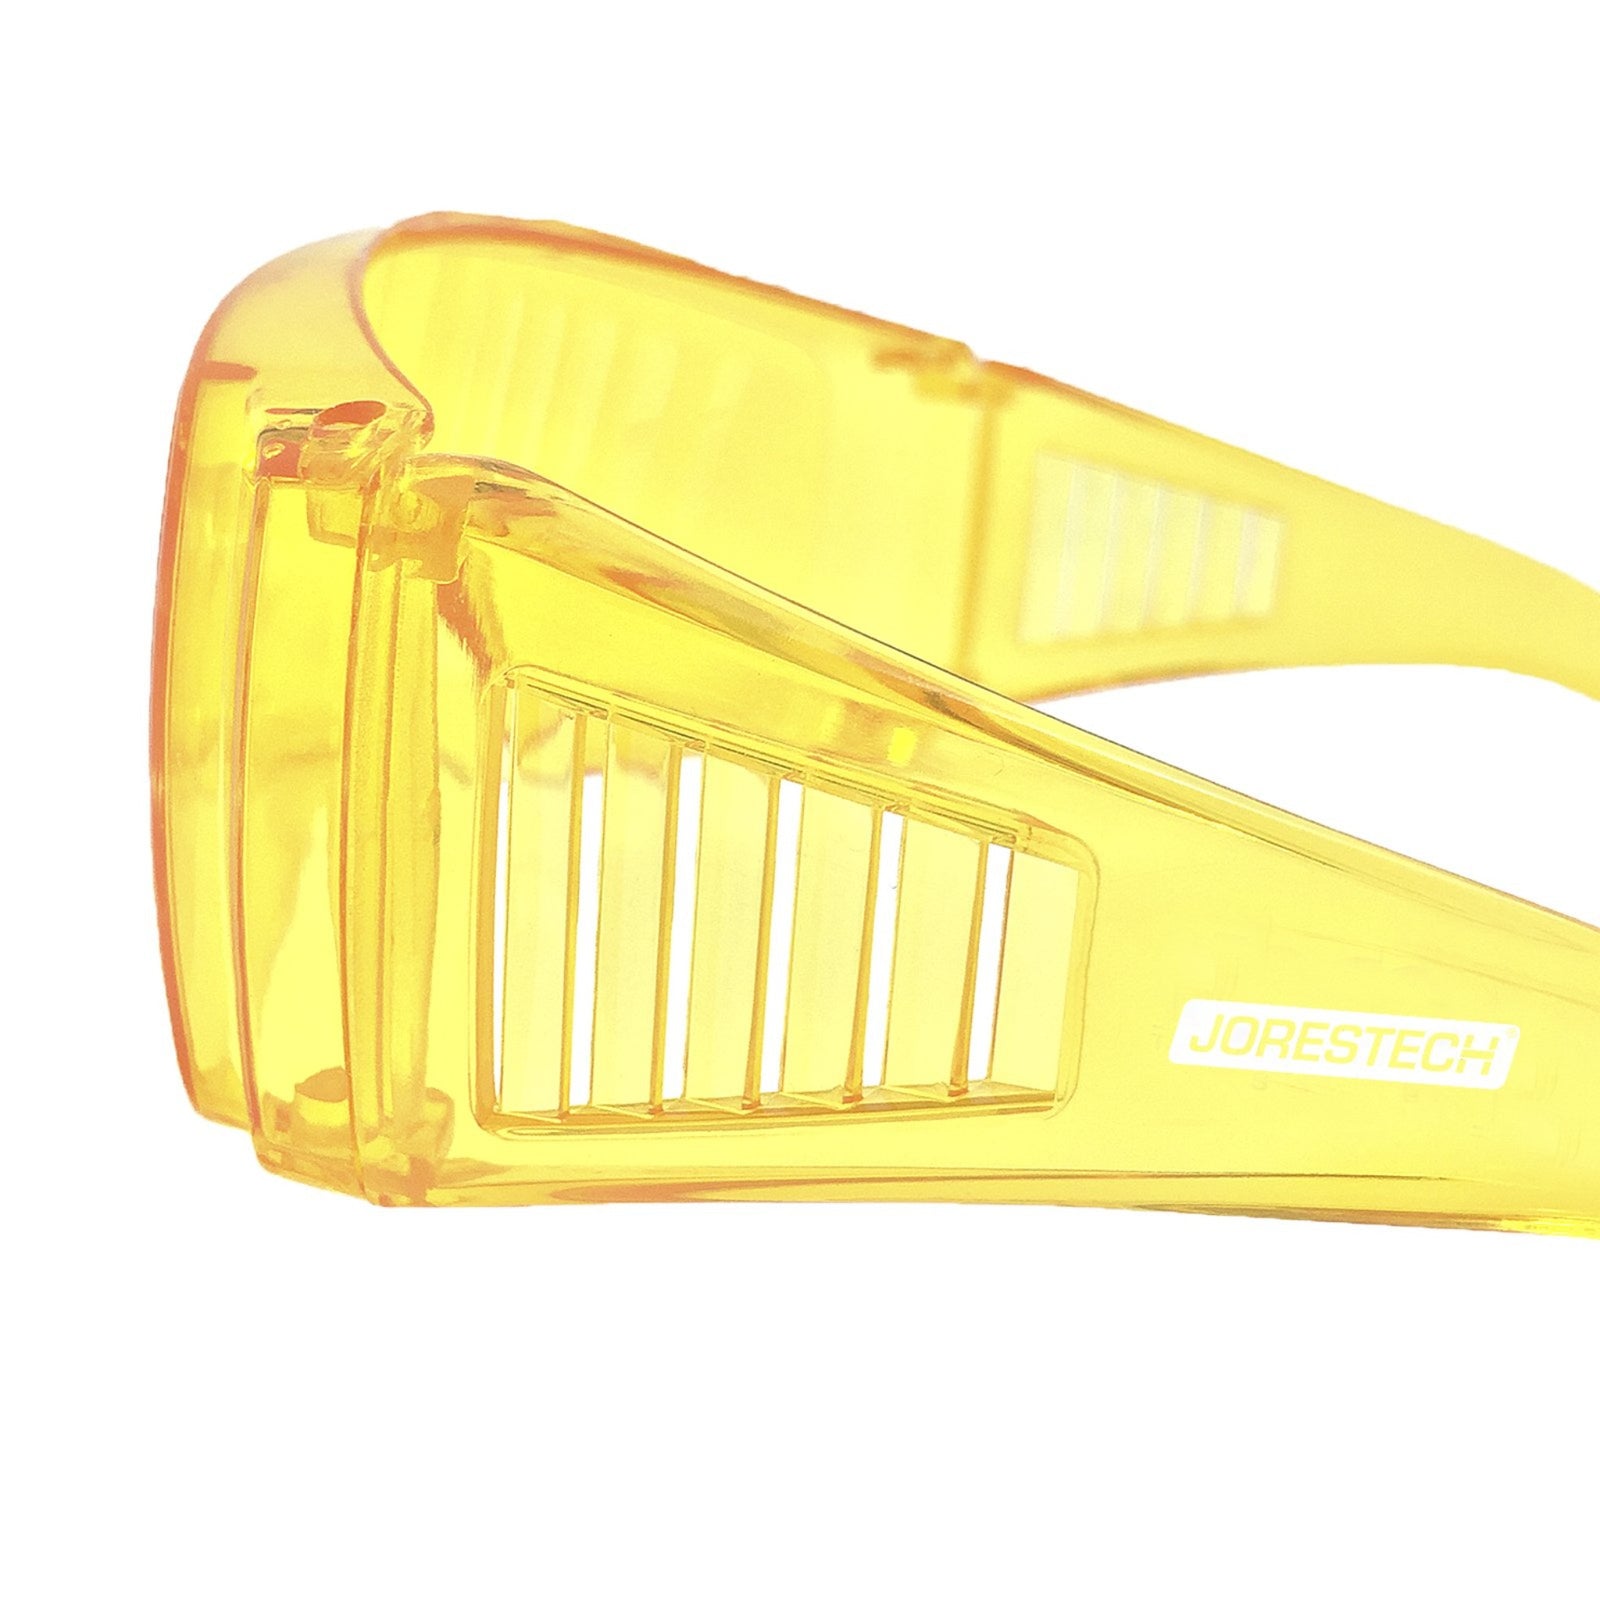 Side view of the yellow Jorestech safety overglasses for high impact protection on a white background